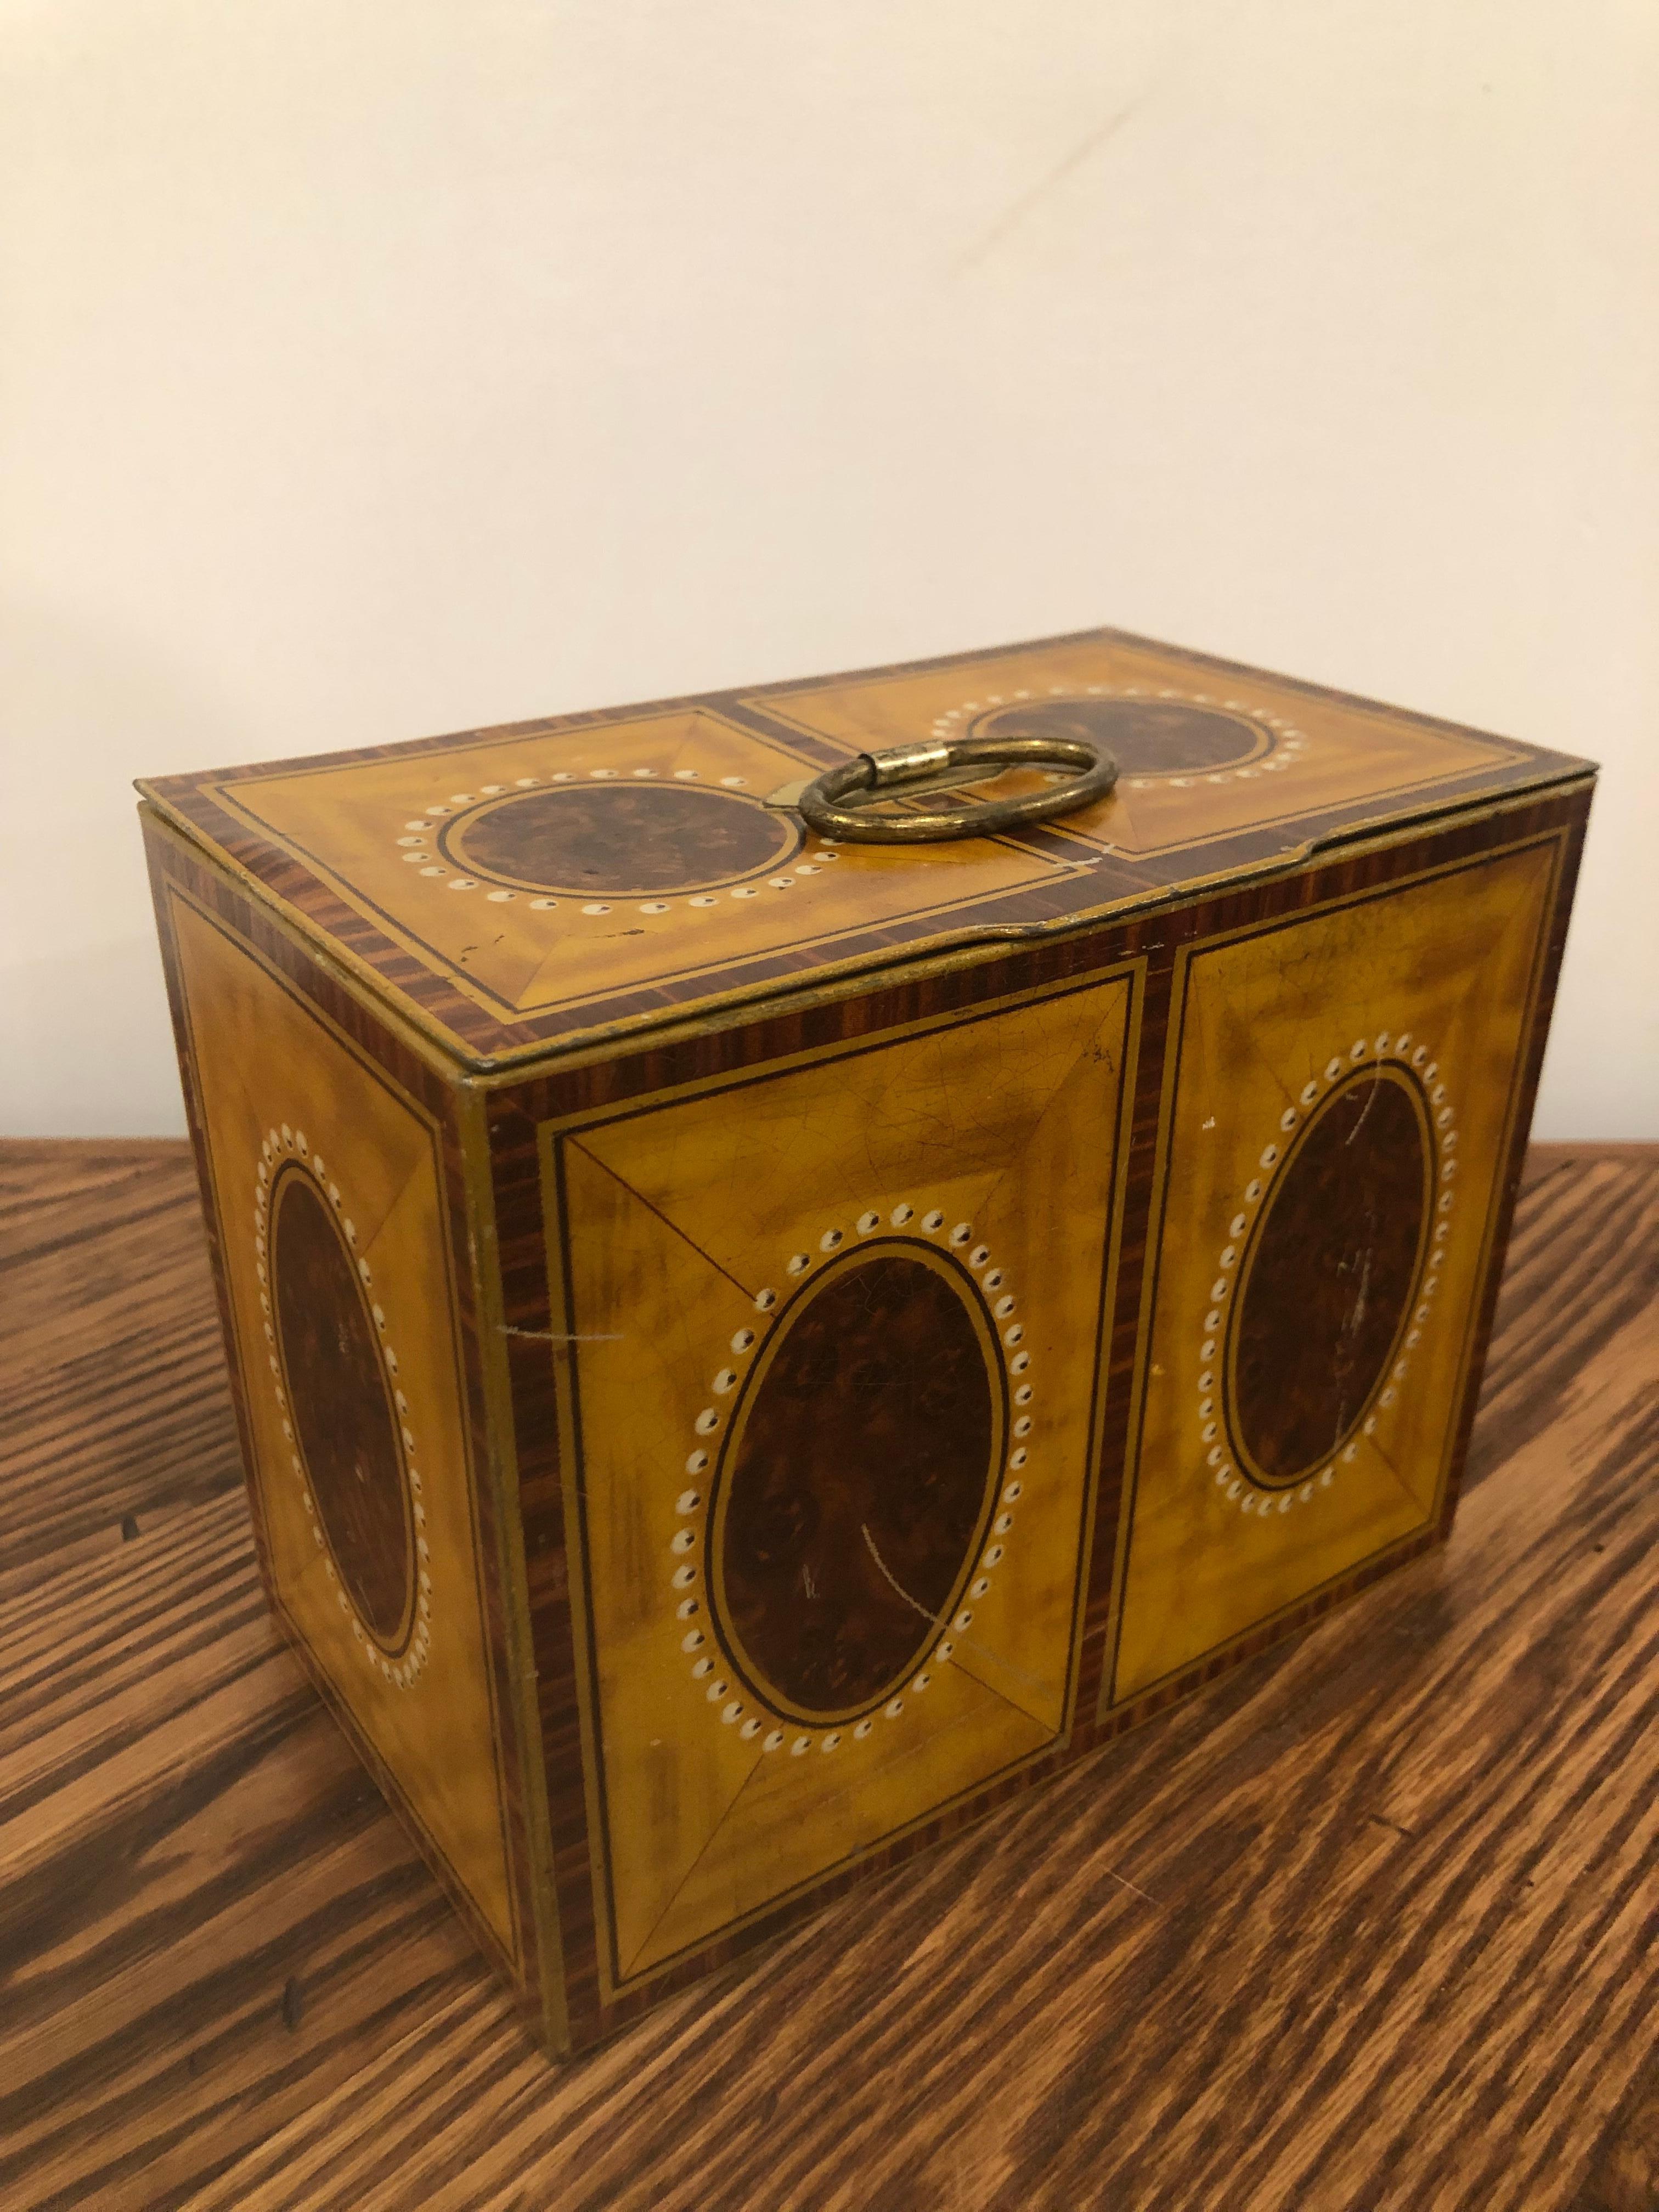 English 1938 William Crawford & Sons biscuit tin which could be used as a tea caddy. Painted satinwood and mahogany finish on the biscuit tin gives it a nice look. This is from a private collector who traveled the world buying beautiful pieces. Even